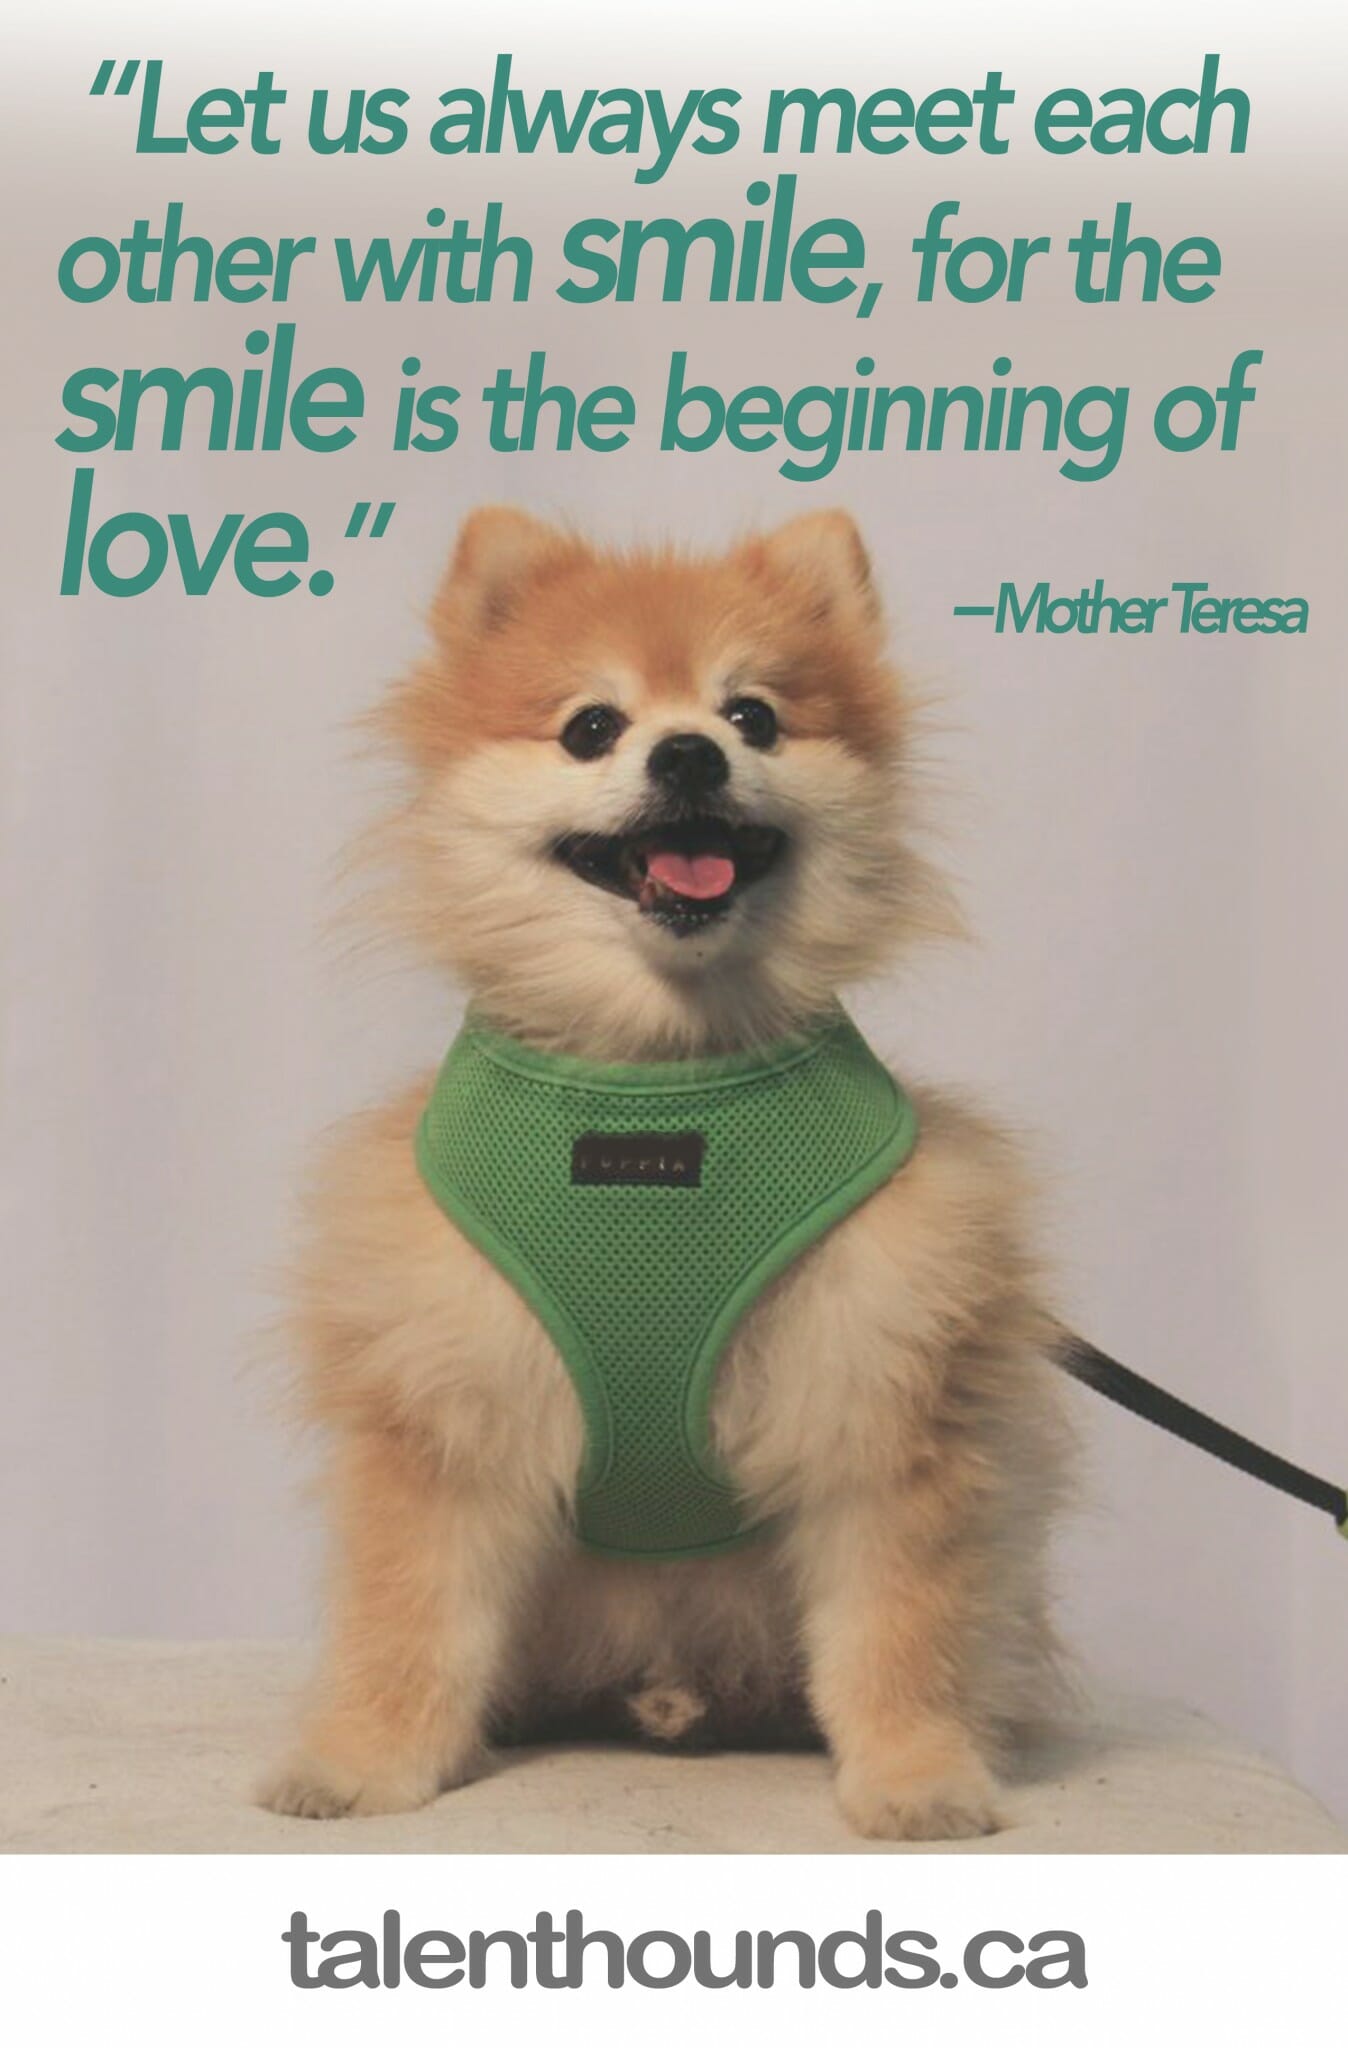 Enjoy this inspiring Happiness Quote and adorable dog picture "Let us meet each other with a smile, for the smile is the beginning of love